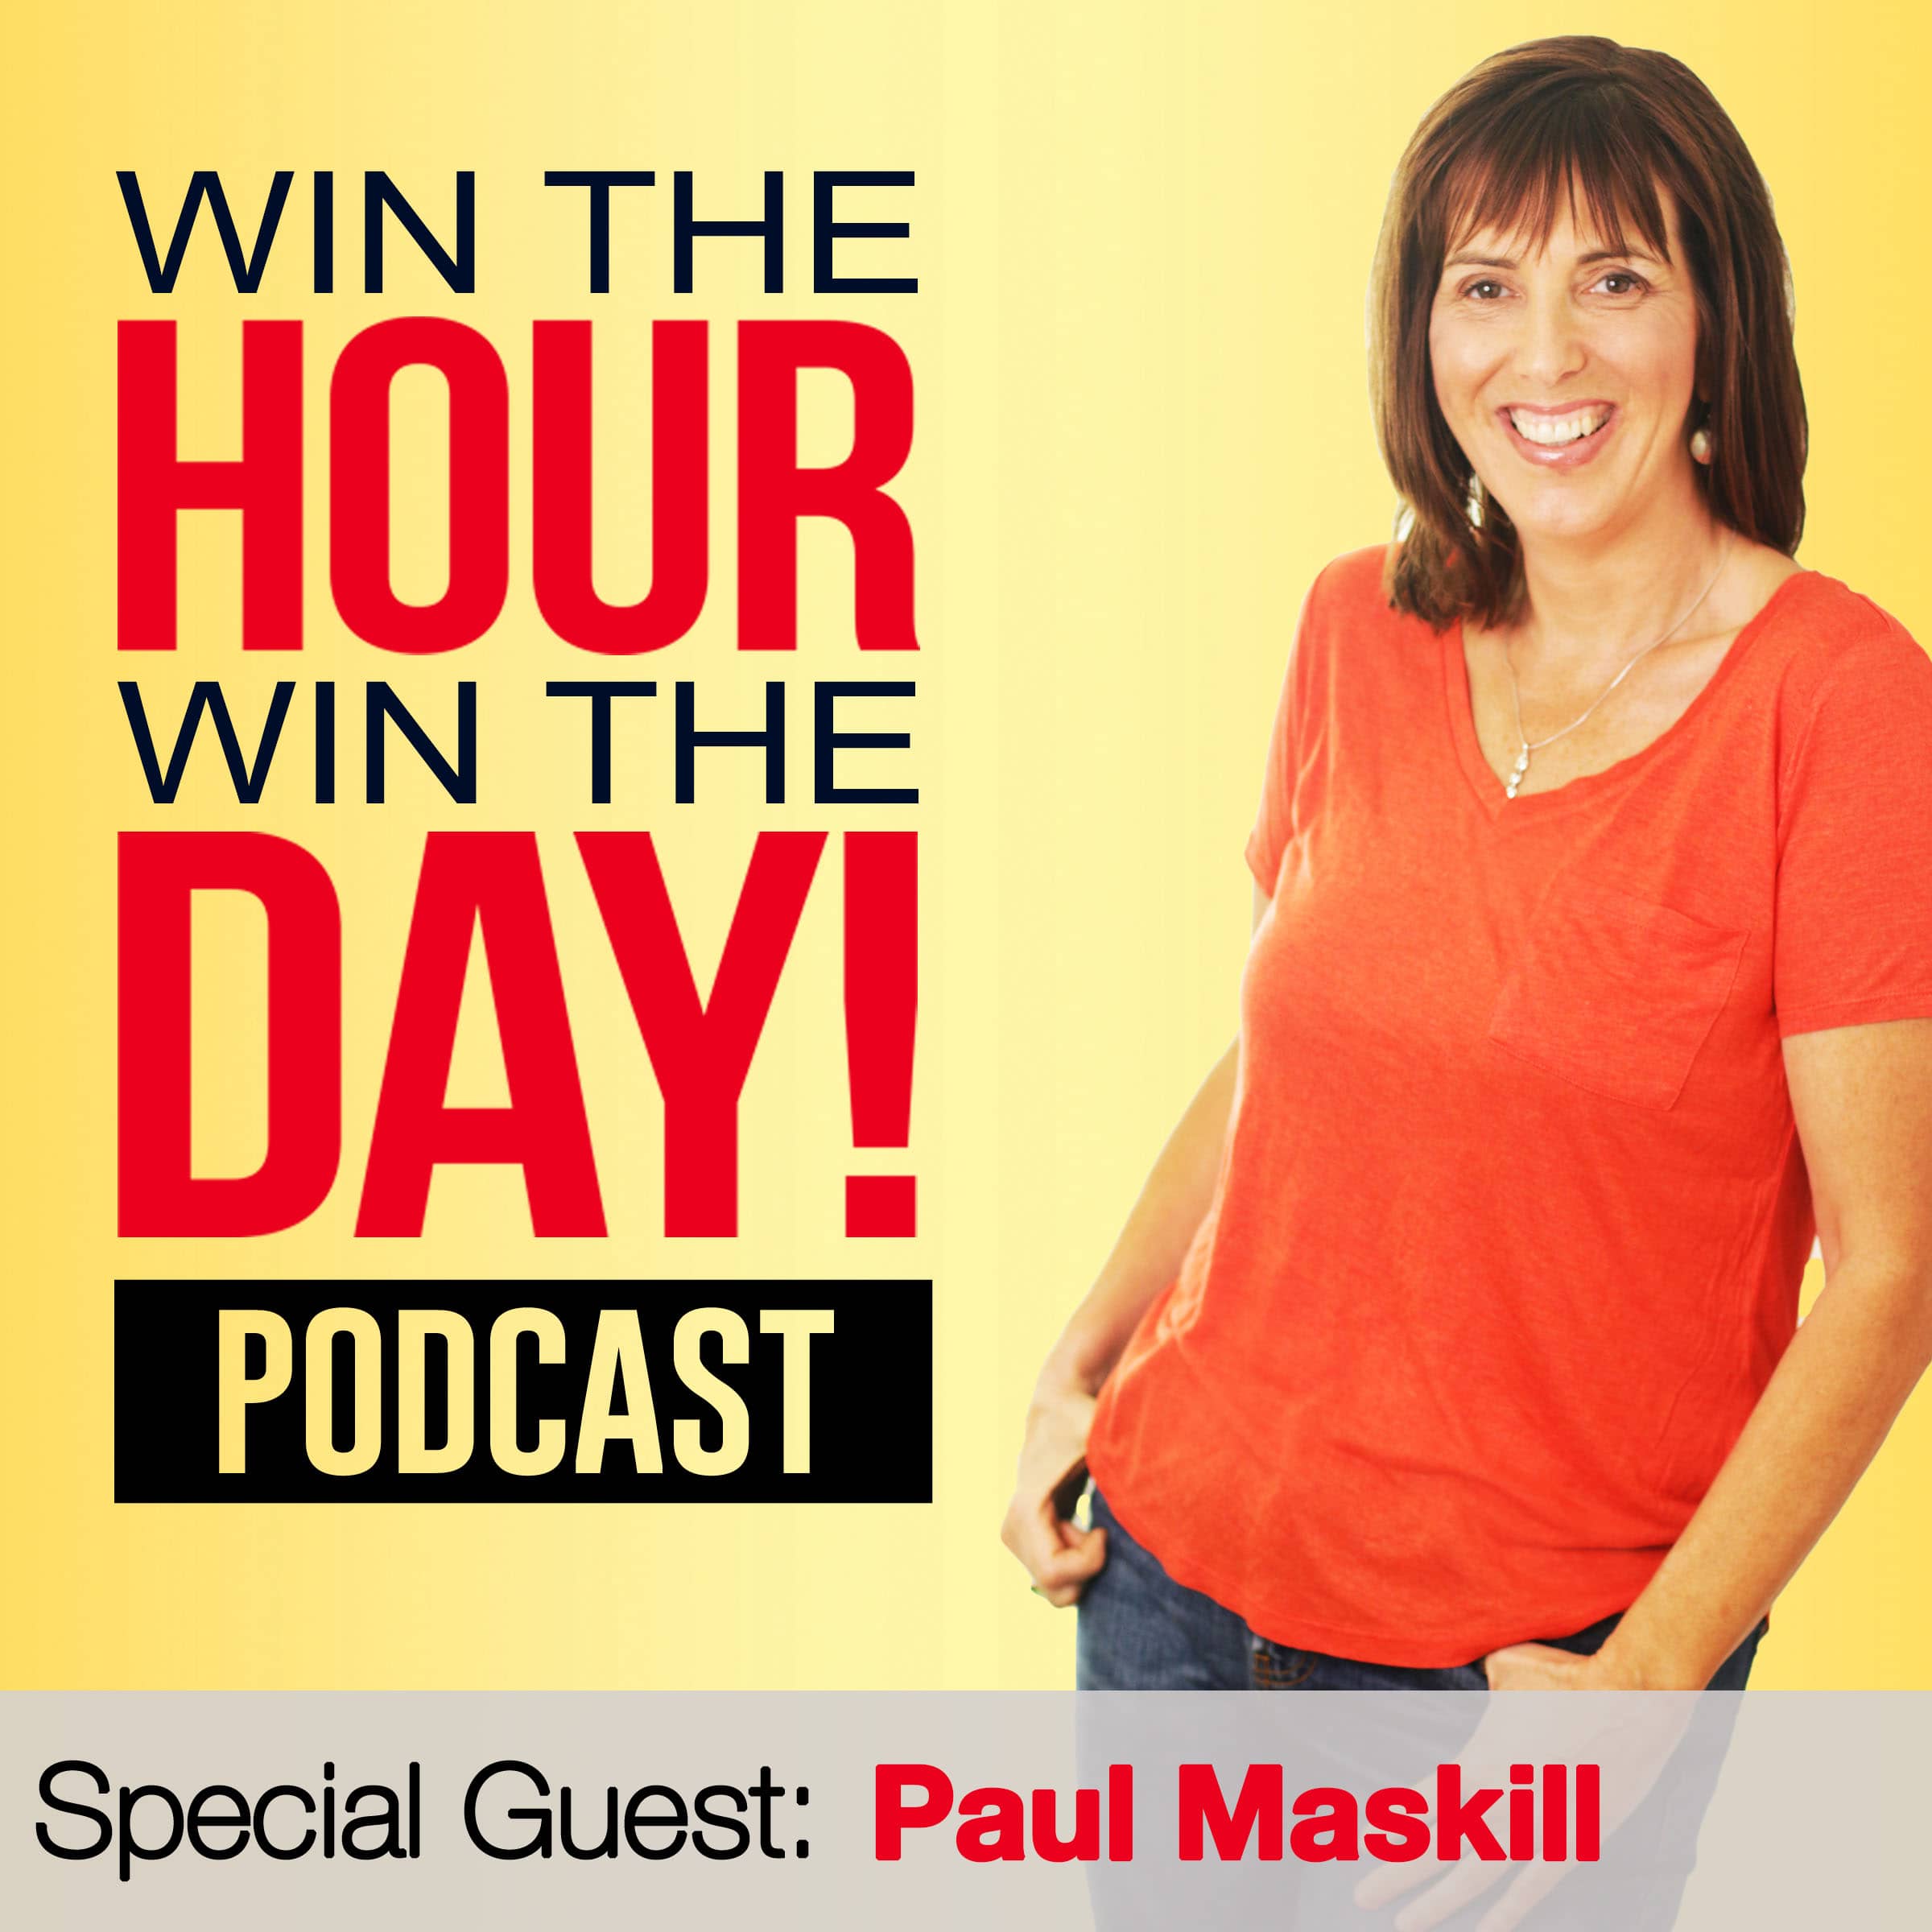 The One Mistake Could Cost You Your Retirement! With Paul Maskill